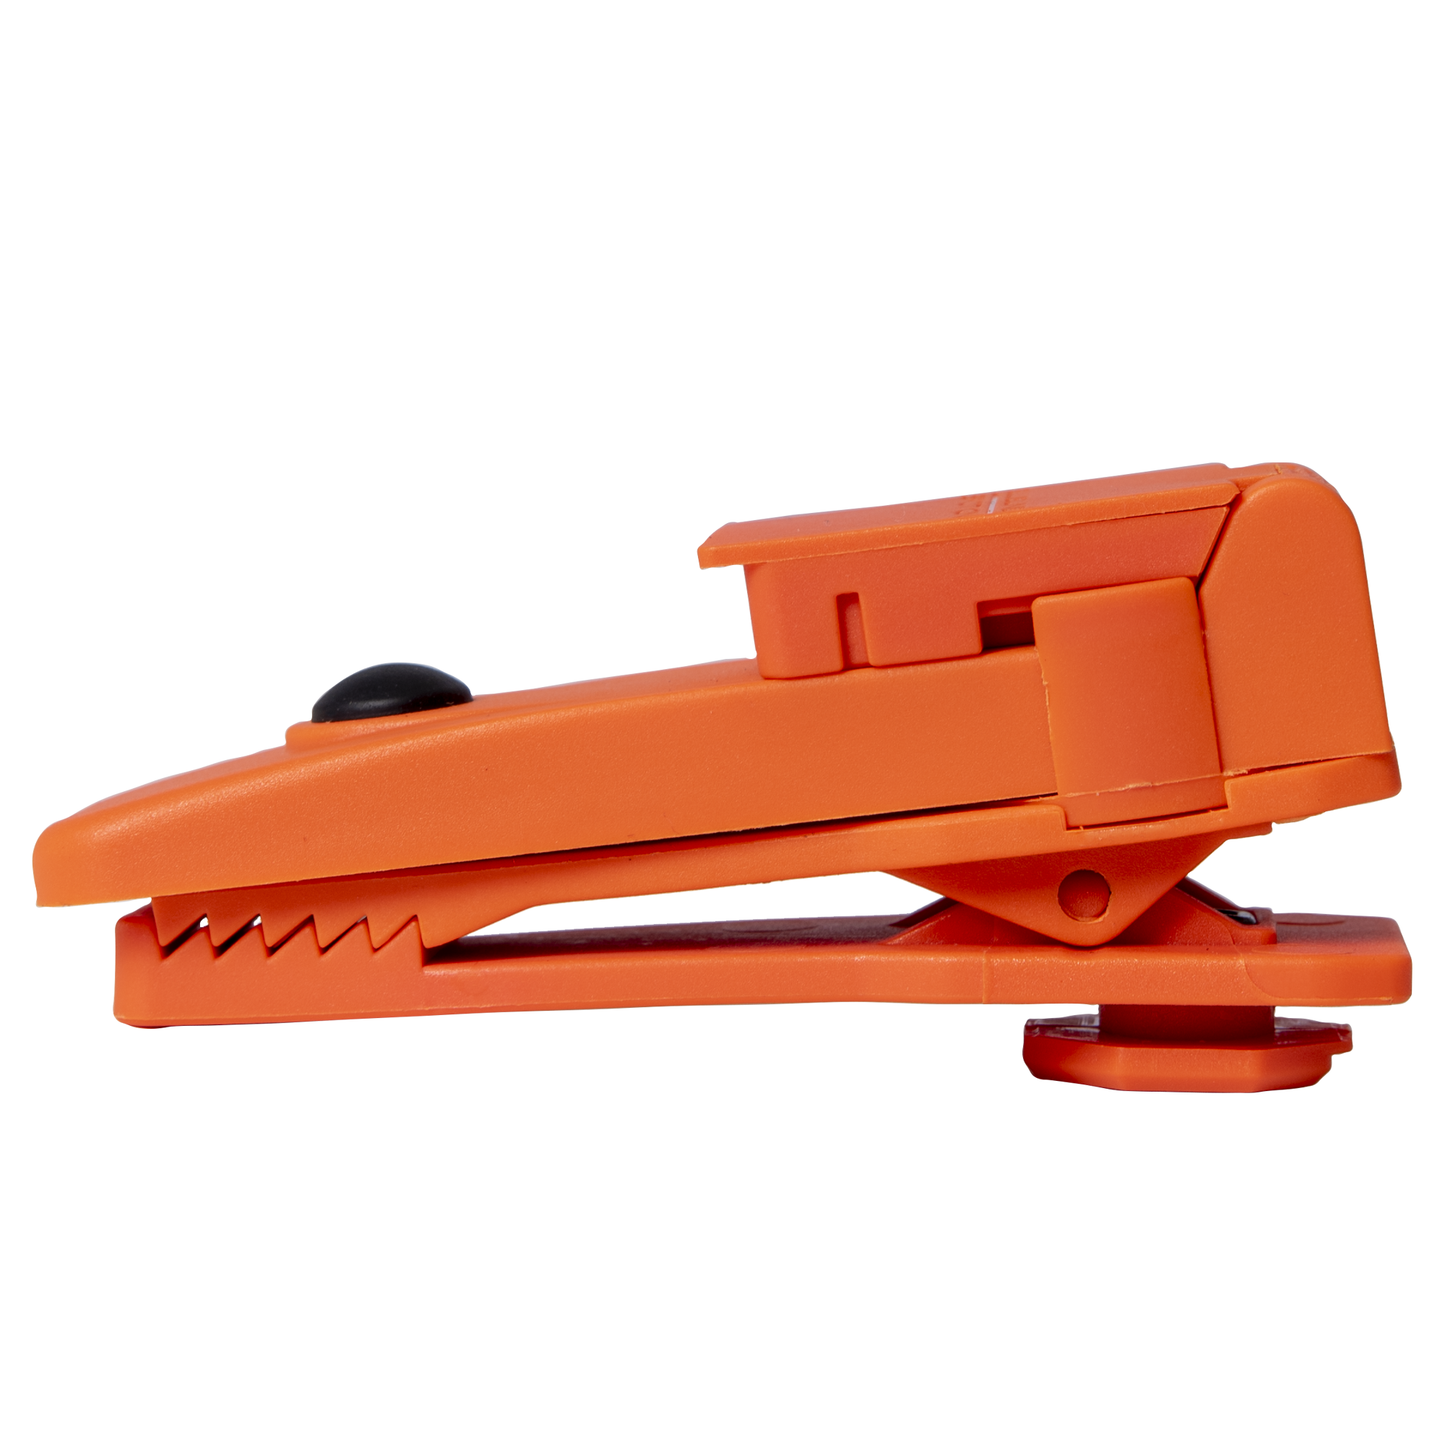 Clip-on Torch With Dual LED - Orange